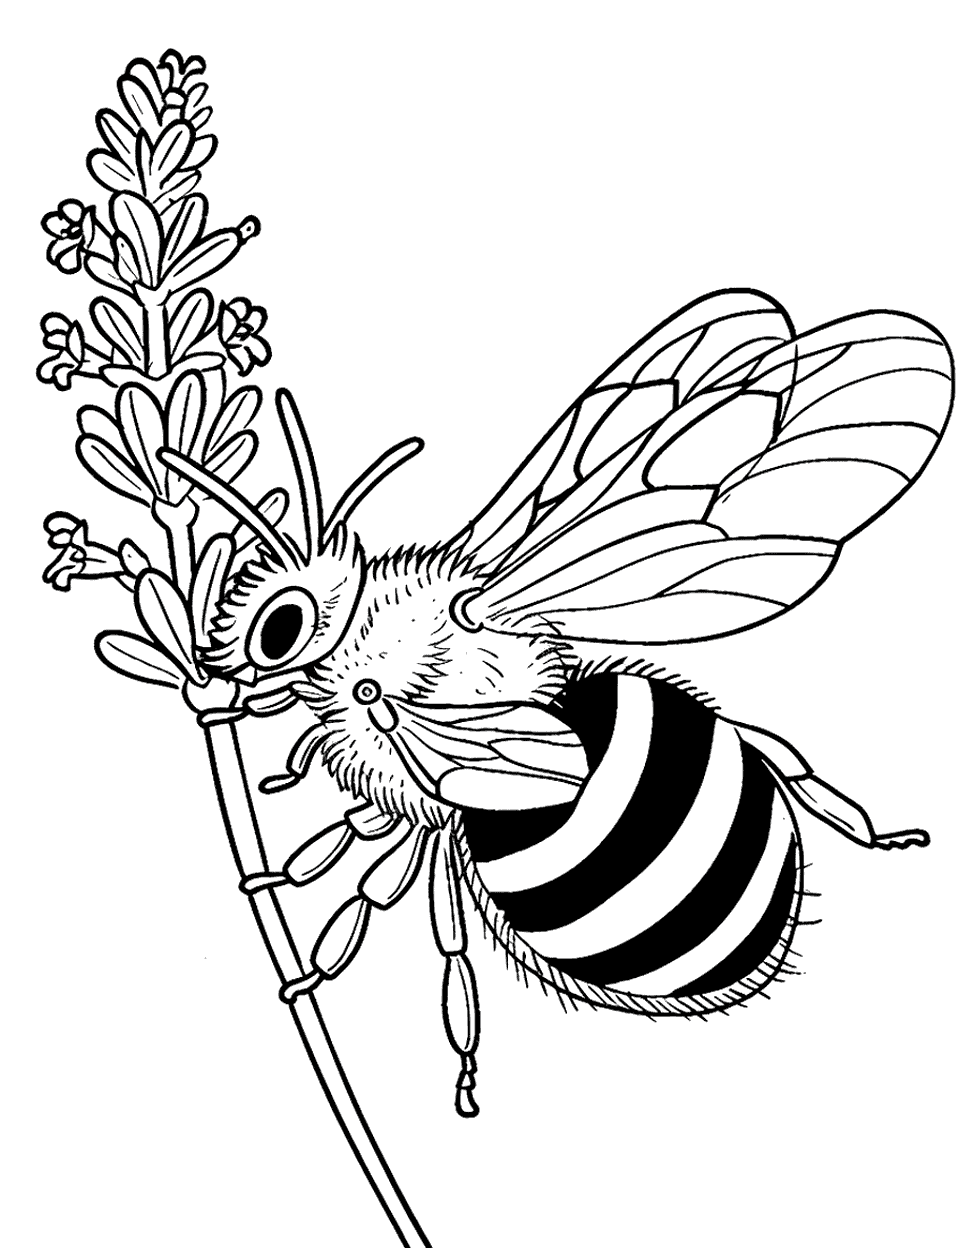 Bee on a Lavender Sprig Coloring Page - A bee collecting nectar from a fragrant sprig of lavender.